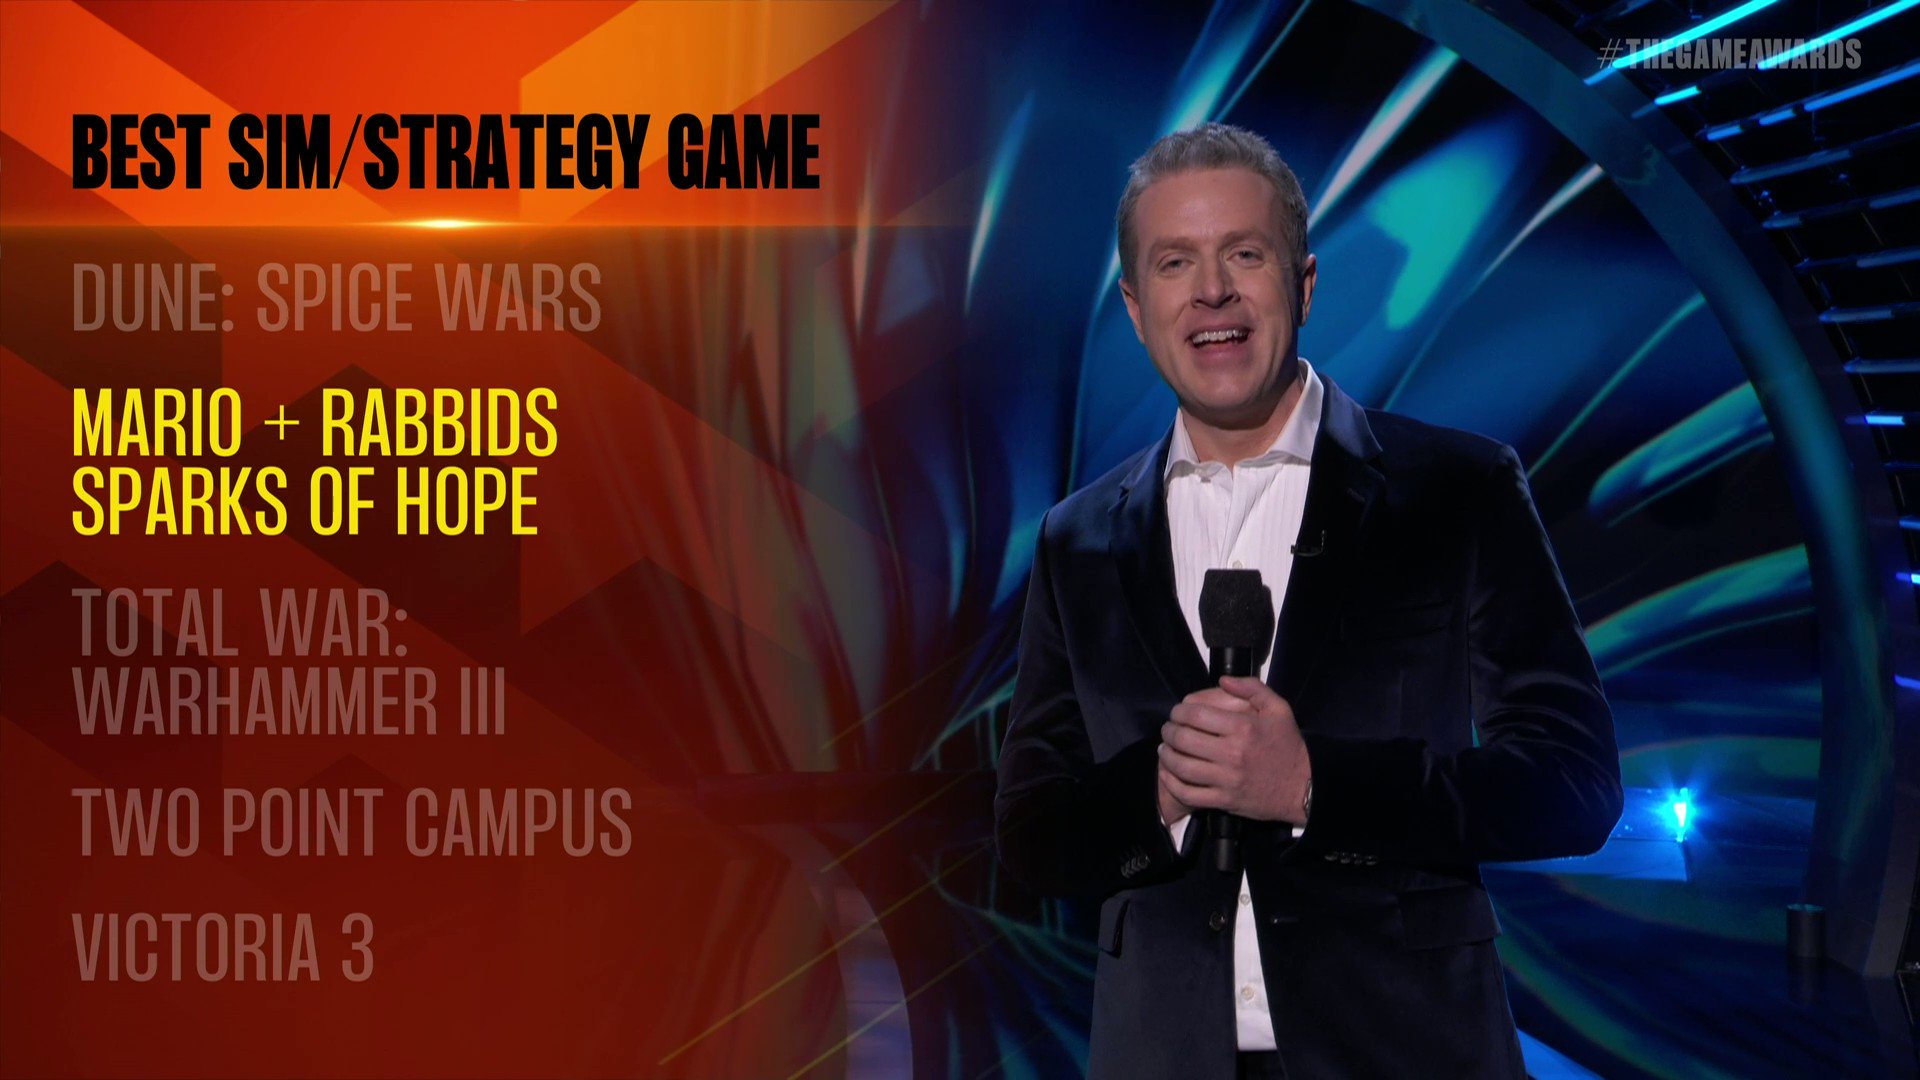 FNAssist on X: #Fortnite is nominated at #TheGameAwards 2022! This year  it's nominated in: - Best Ongoing Game - Best Community Support (See what  games they're up against in those categories in